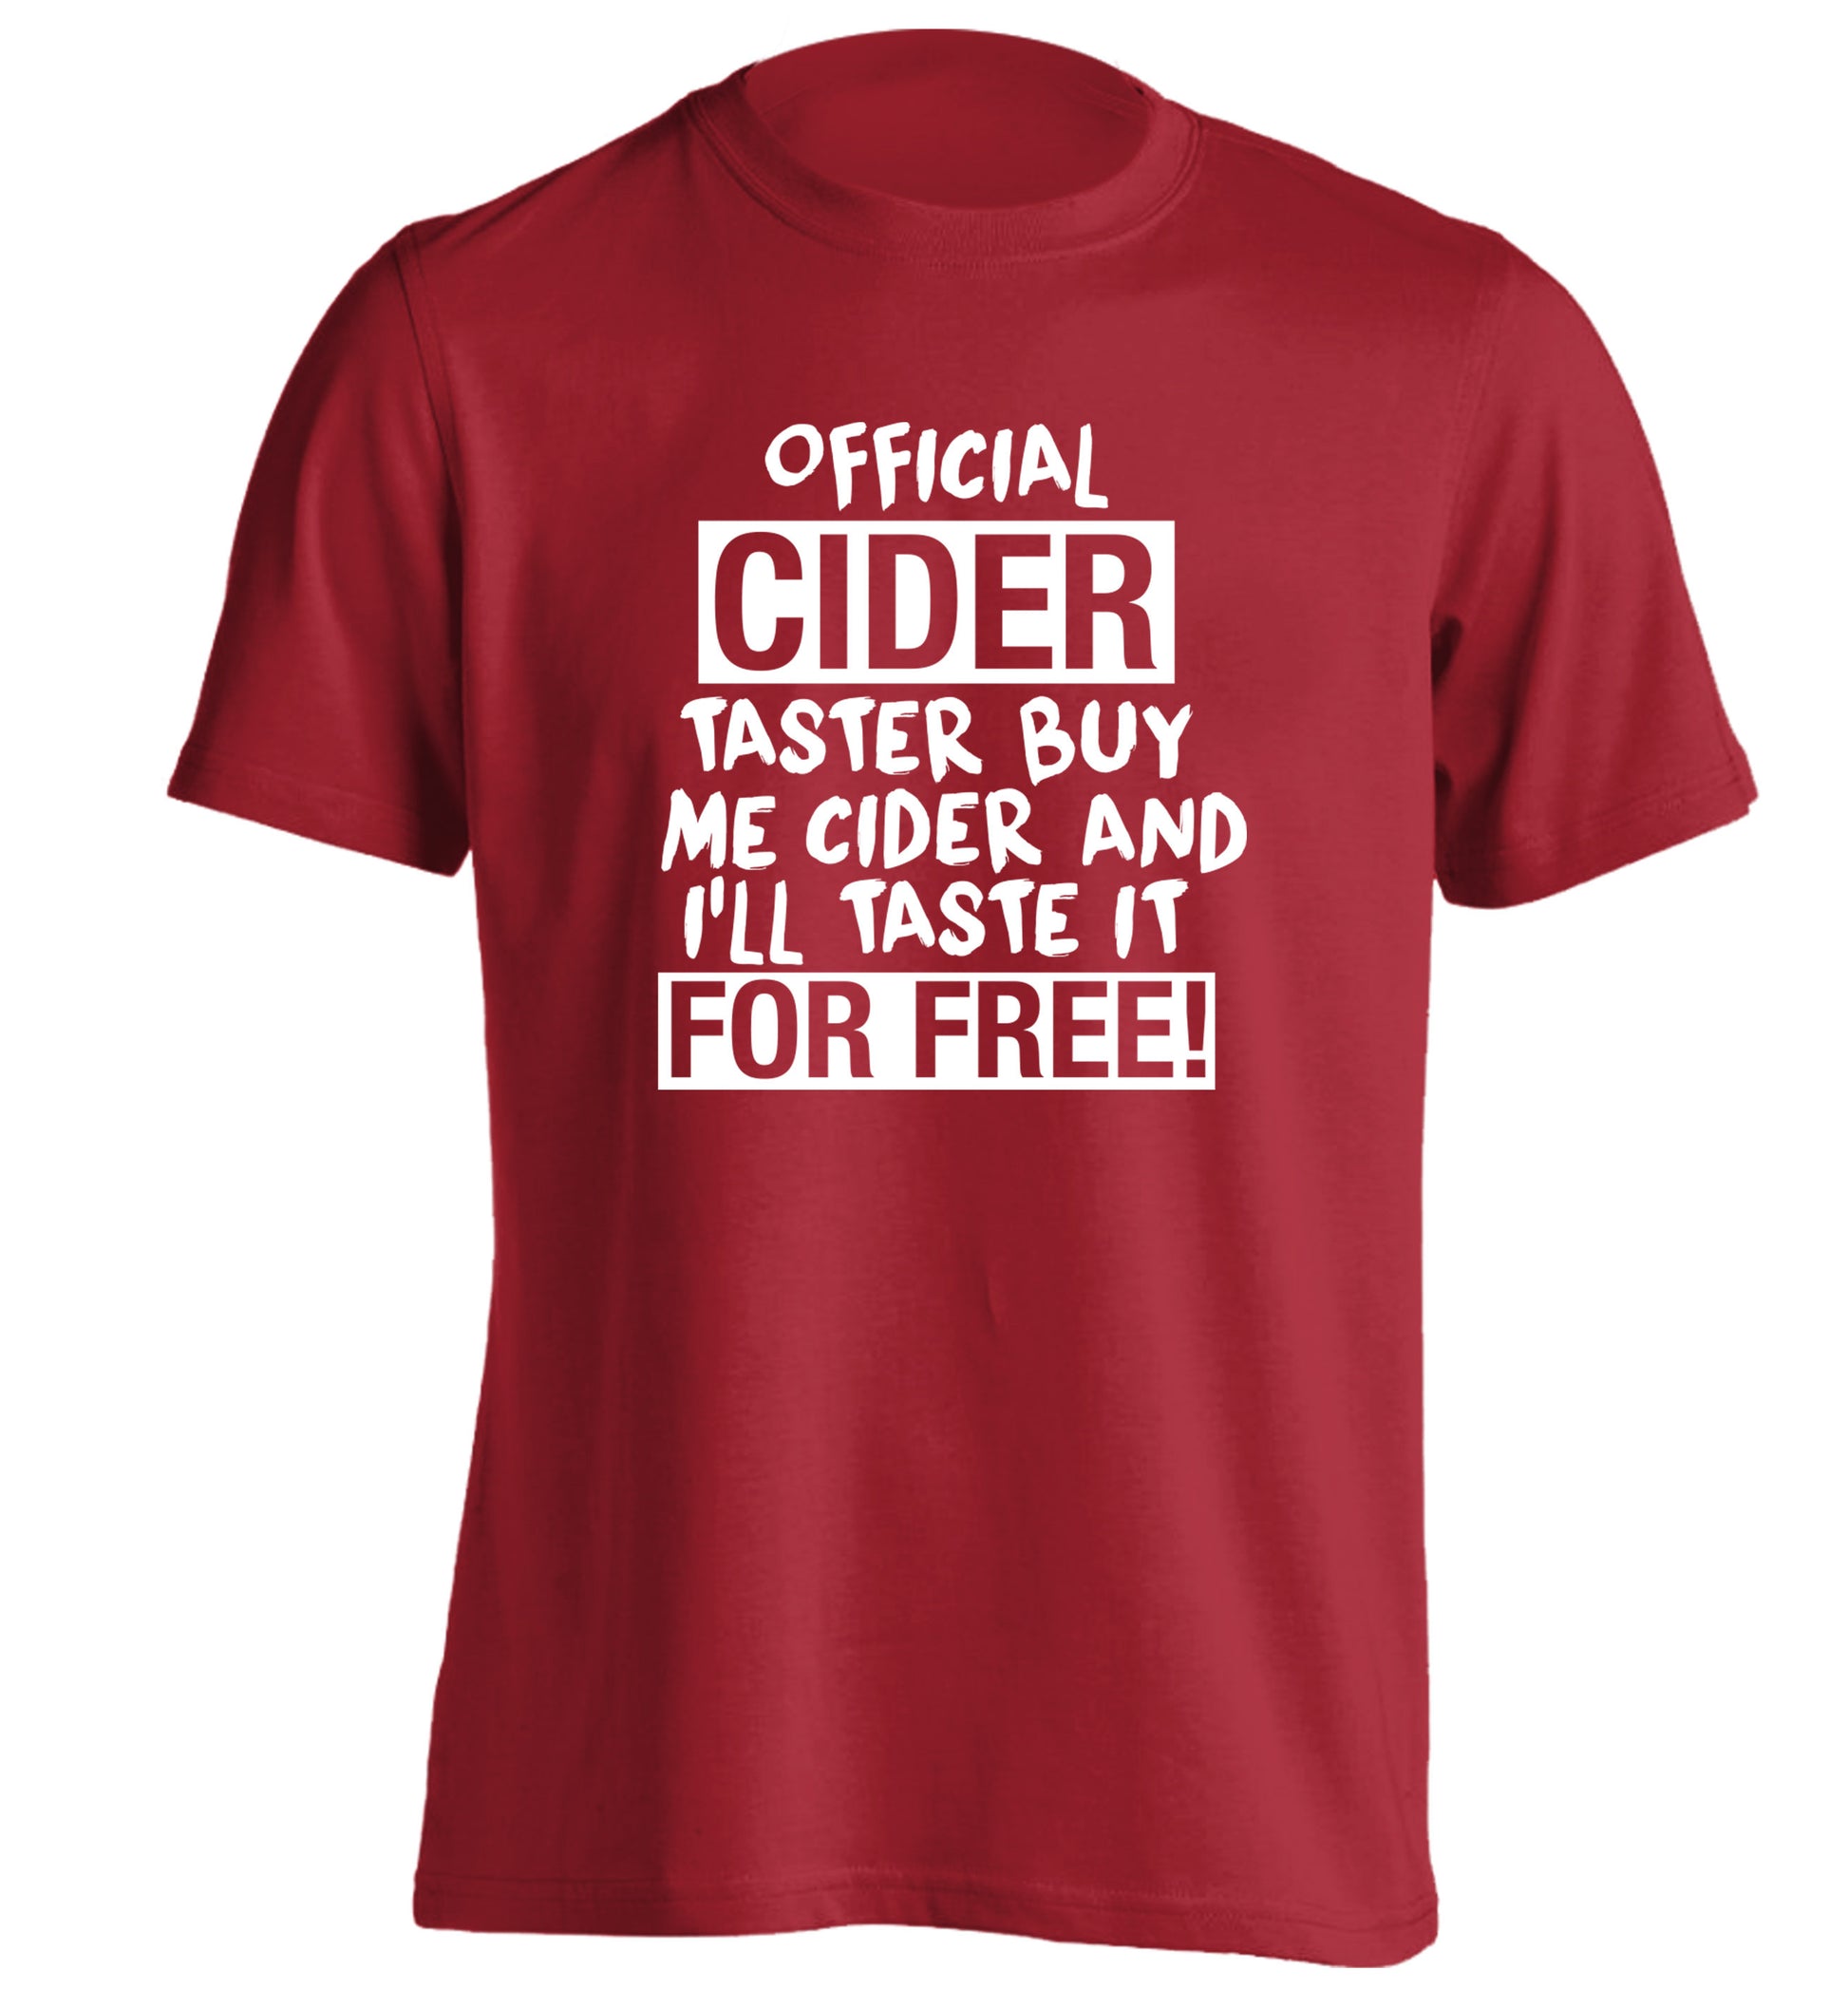 Official cider taster buy me cider and I'll taste it for free! adults unisex red Tshirt 2XL